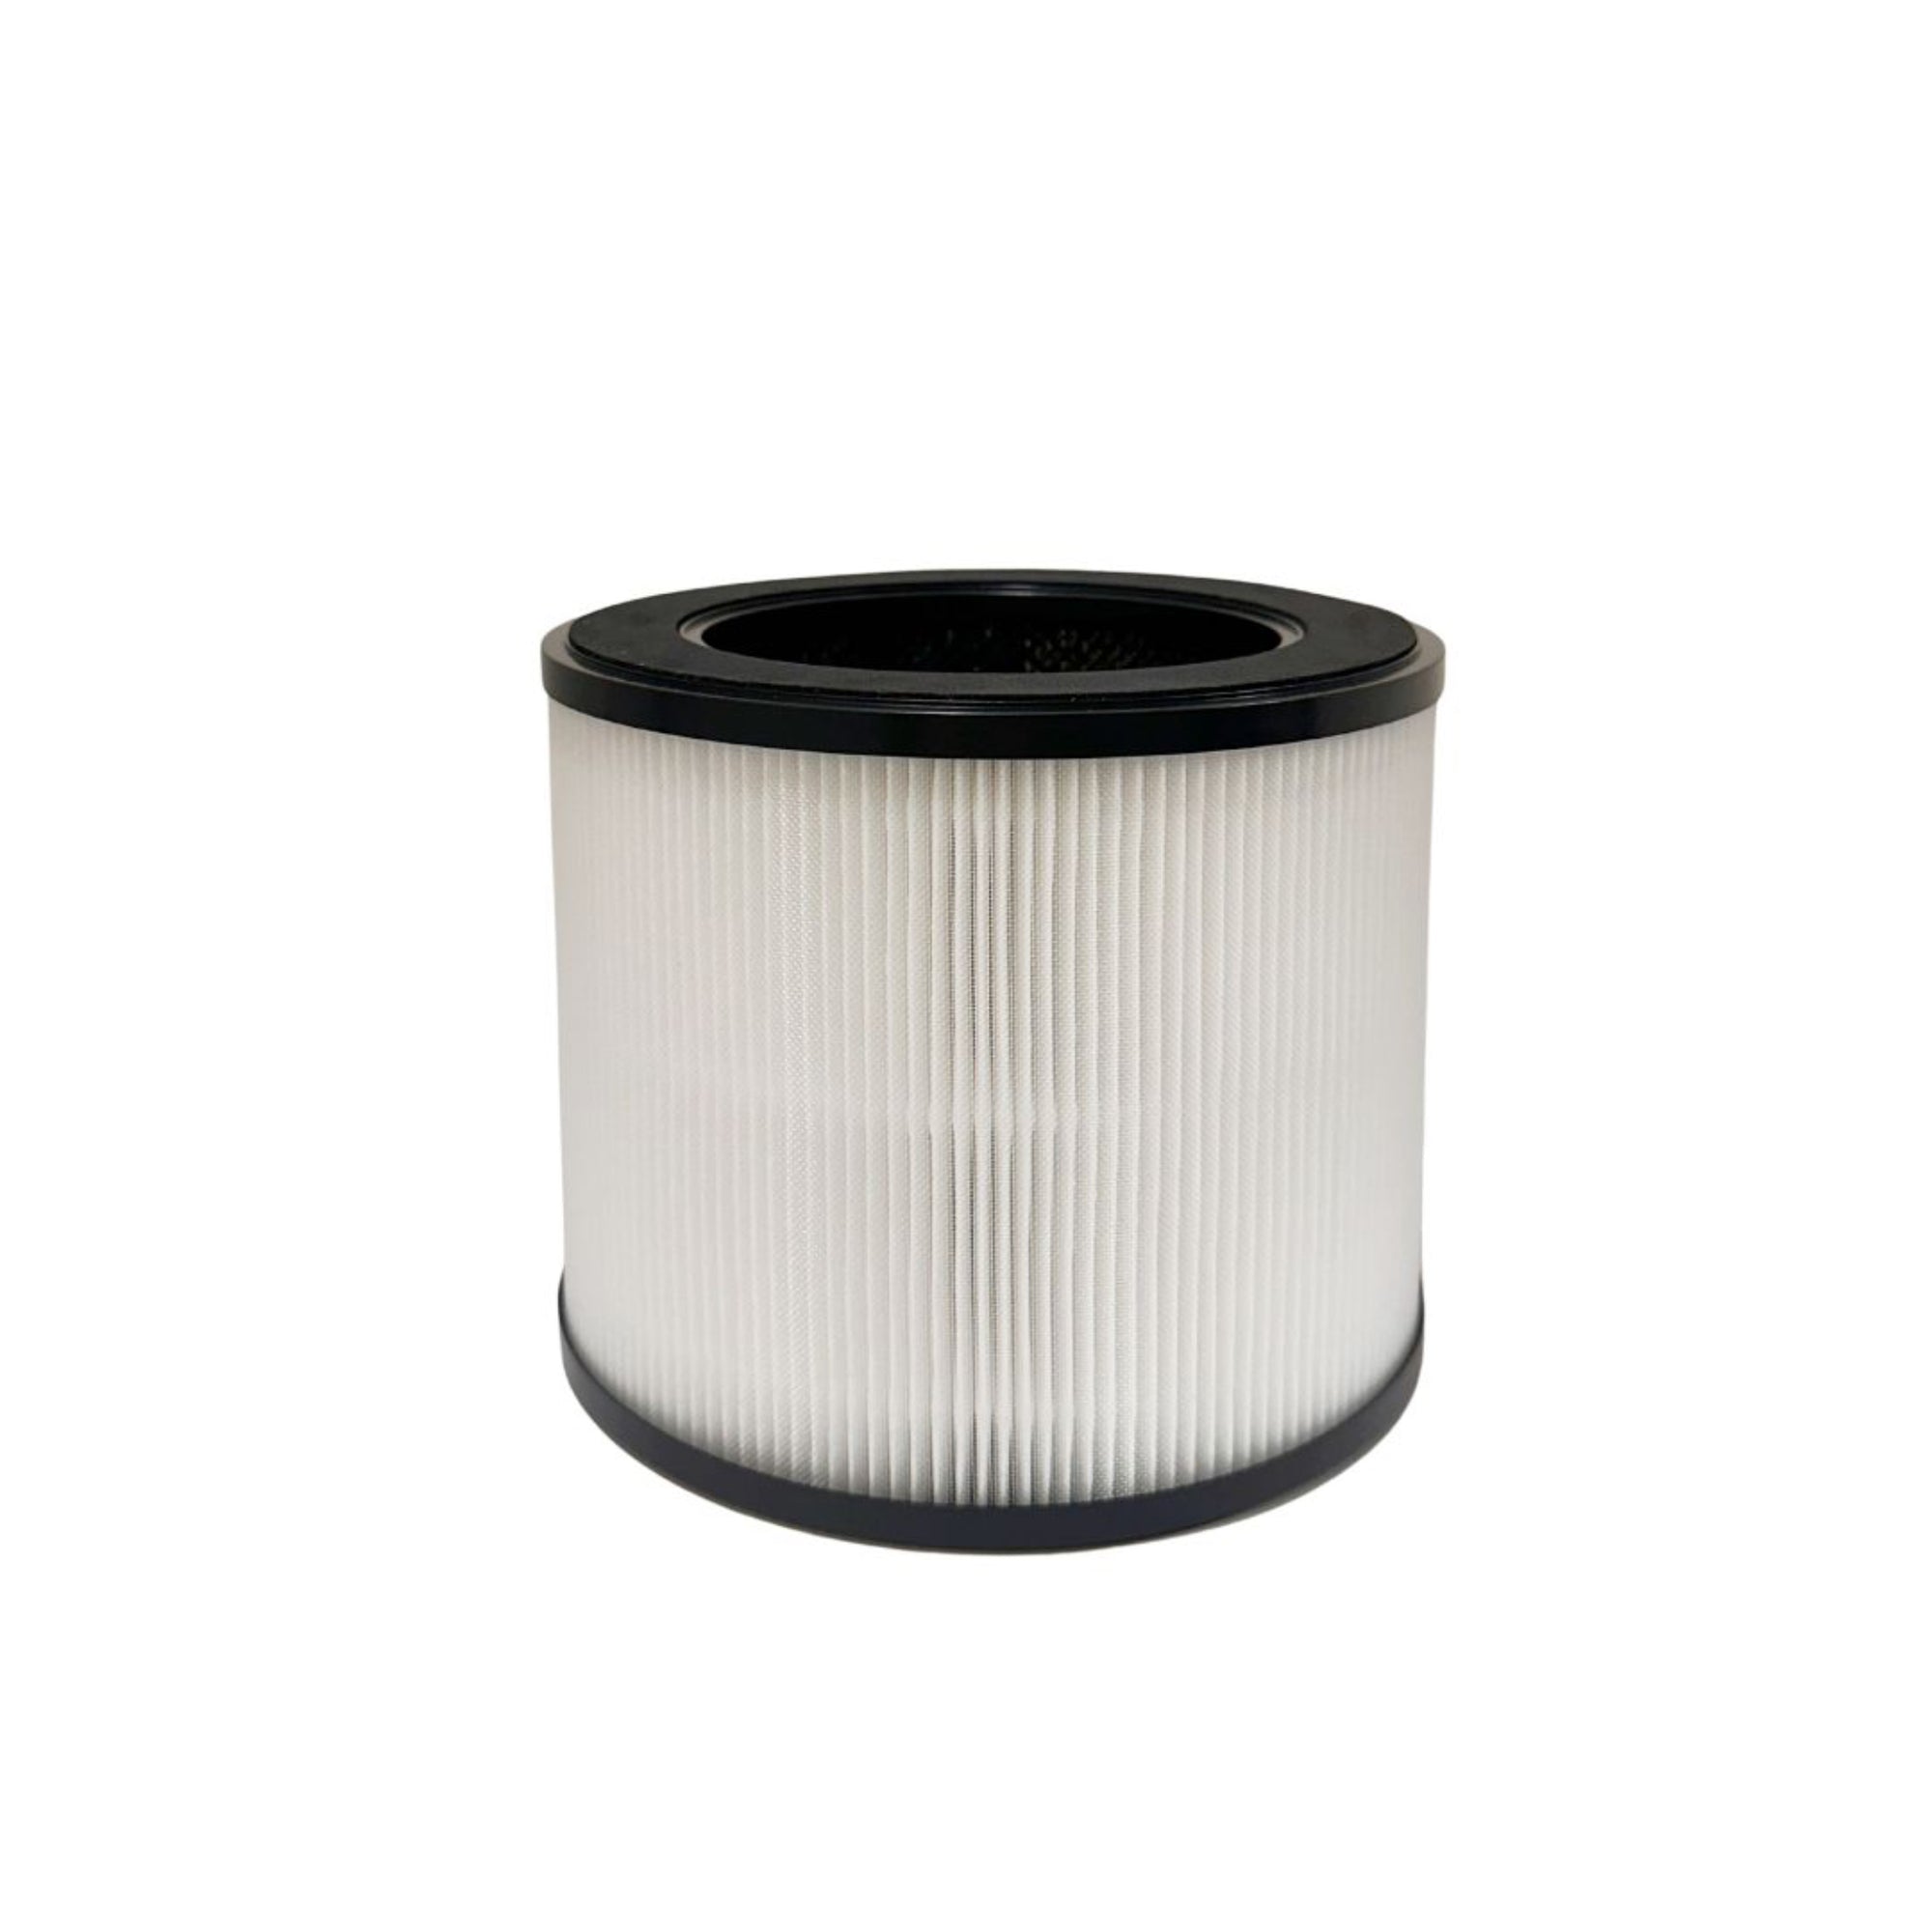 Nispira True HEPA Replacement Filter | 3 in 1 with Pre-filter | Compatible with Medify MA-22 Air Purifier